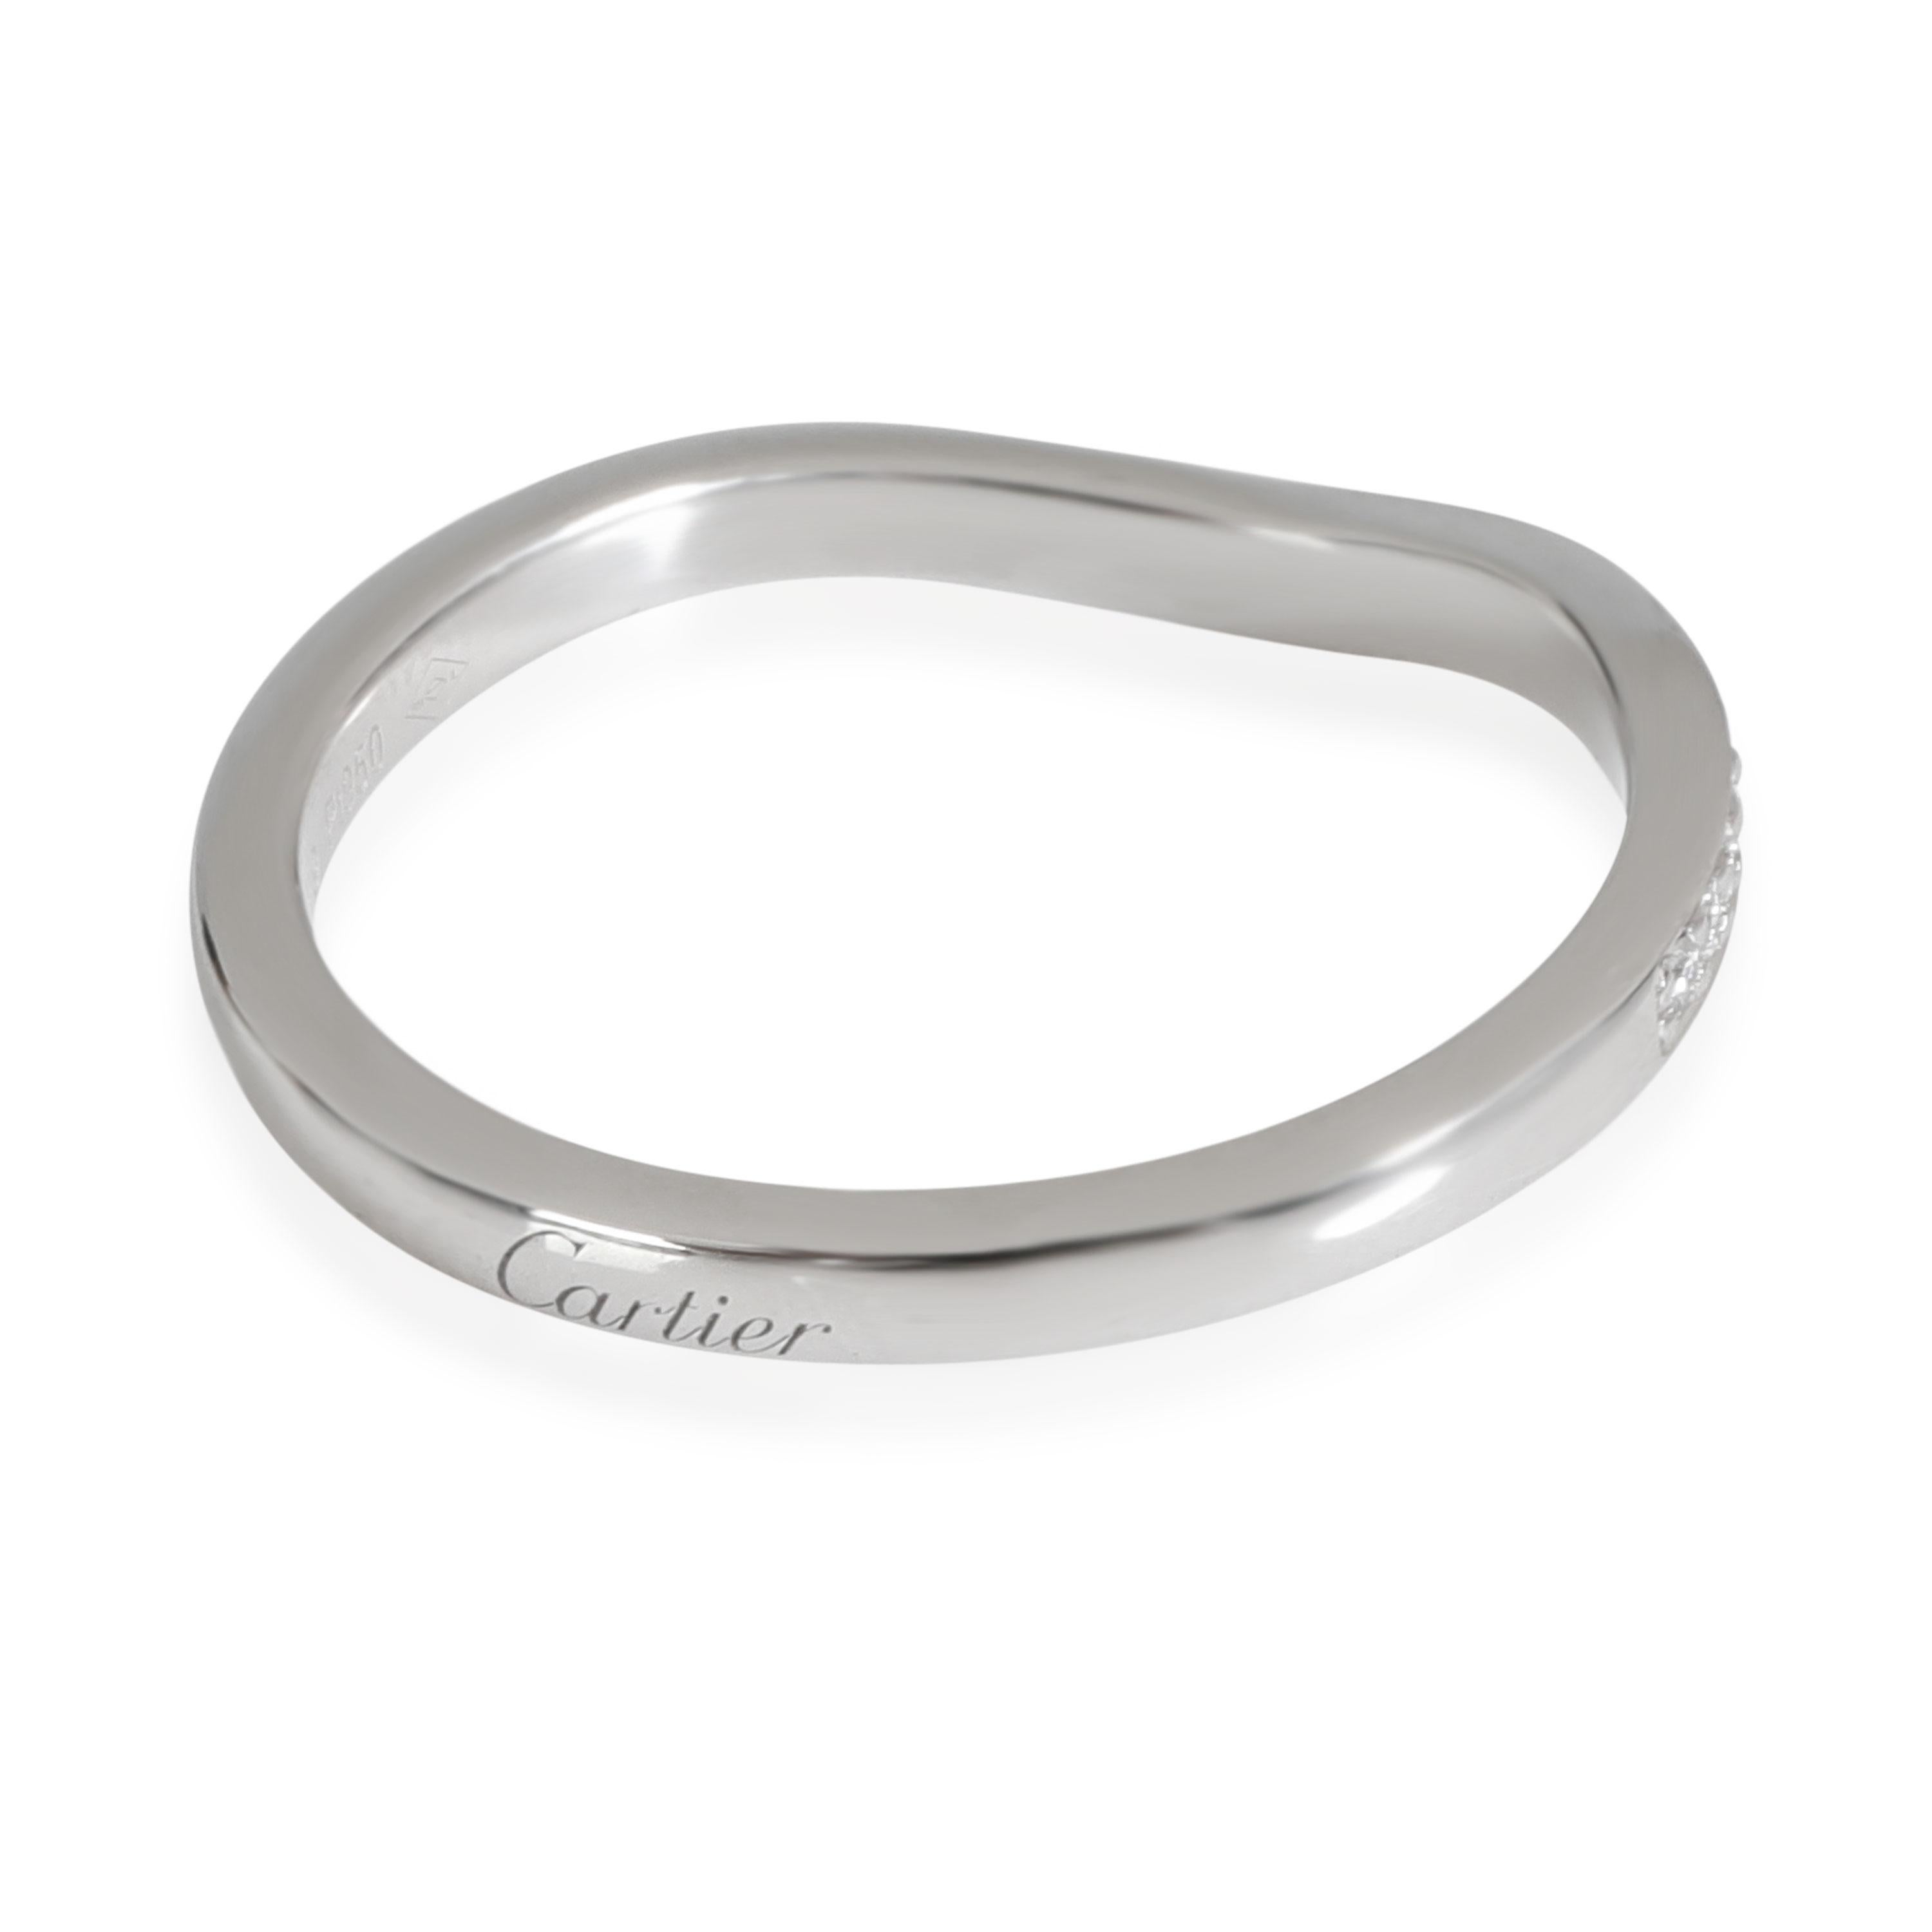 Cartier Ballerine Curved Diamond Band in Platinum 0.09 CTW

PRIMARY DETAILS
SKU: 116569
Listing Title: Cartier Ballerine Curved Diamond Band in Platinum 0.09 CTW
Condition Description: Retails for 3500 USD. In excellent condition and recently